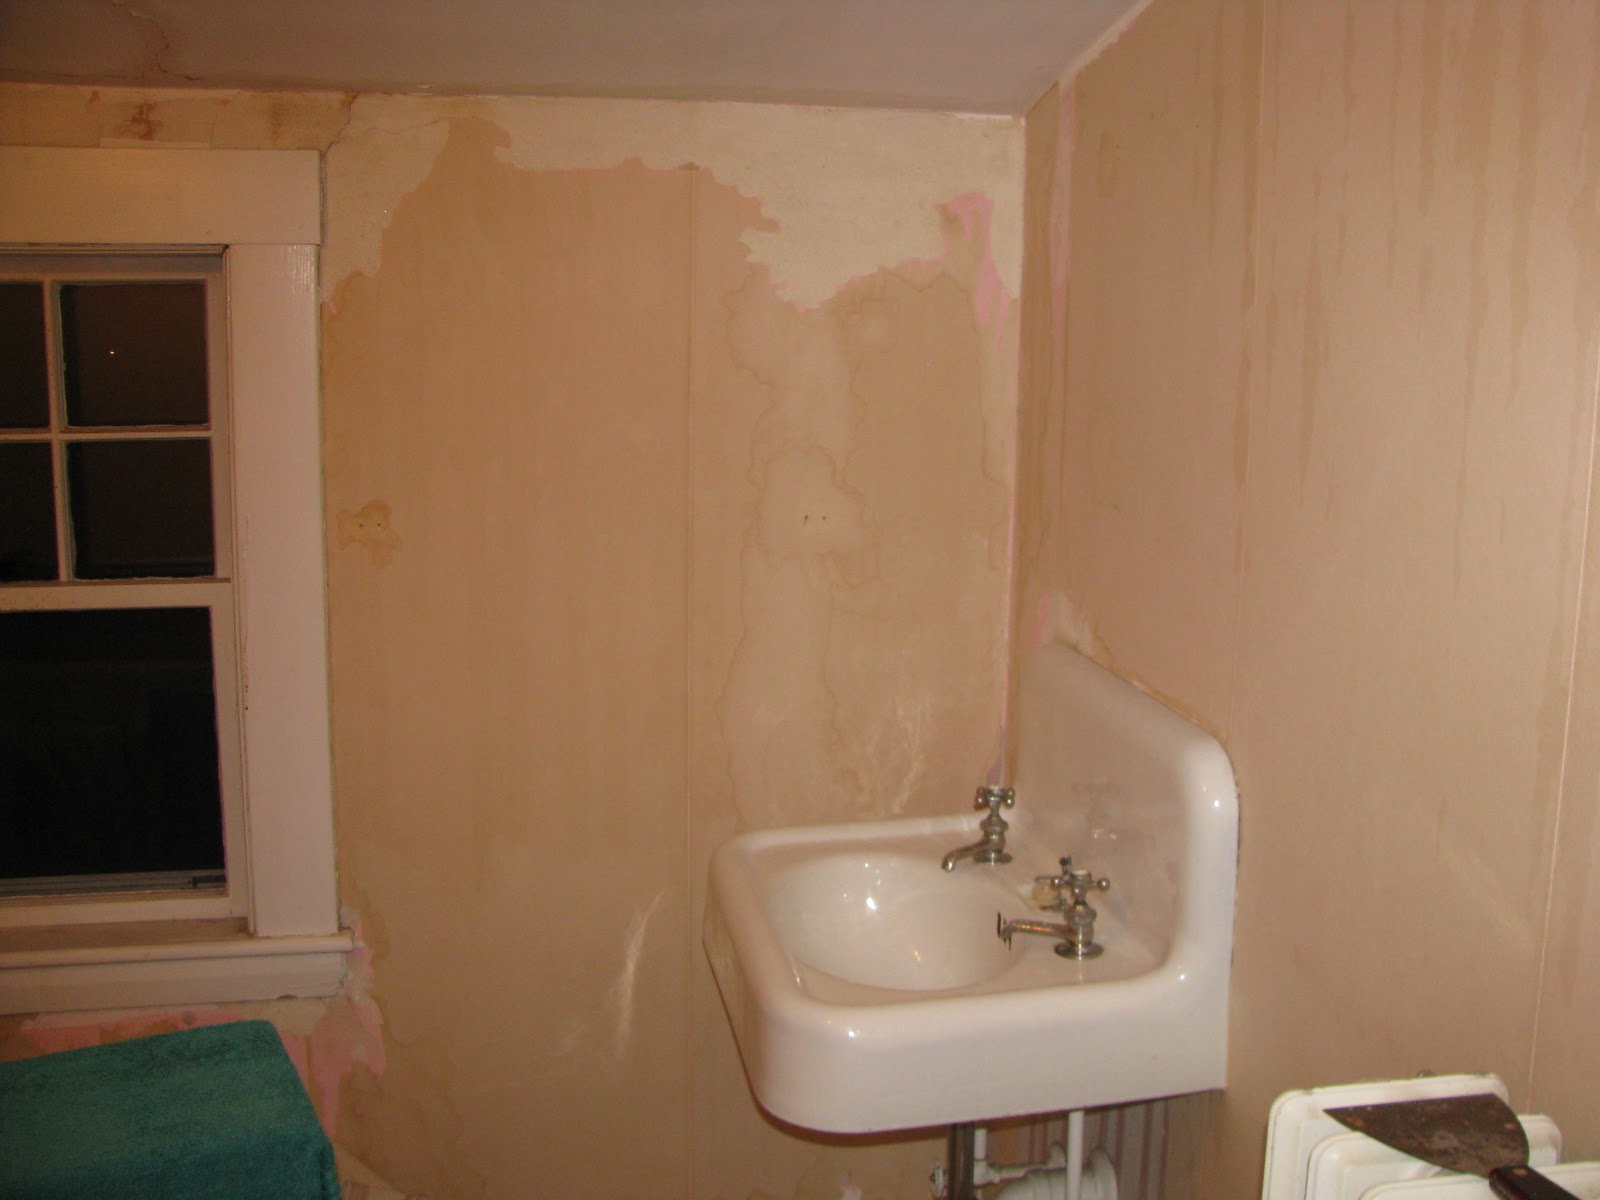 removing wallpaper with fabric softener removing wallpaper with fabric 1600x1200